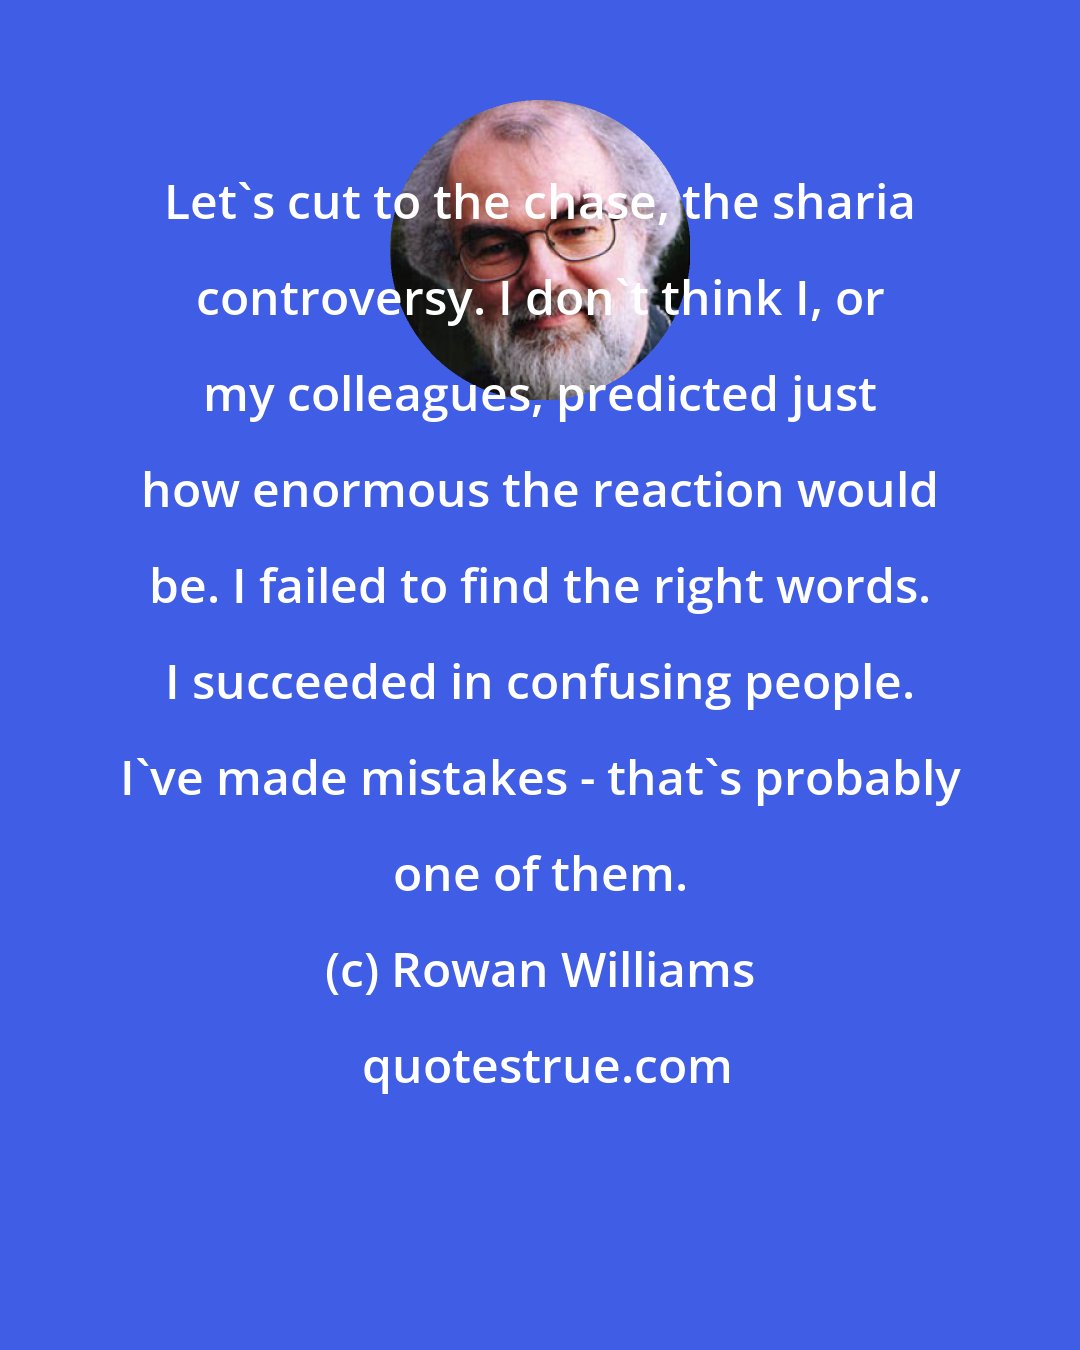 Rowan Williams: Let's cut to the chase, the sharia controversy. I don't think I, or my colleagues, predicted just how enormous the reaction would be. I failed to find the right words. I succeeded in confusing people. I've made mistakes - that's probably one of them.